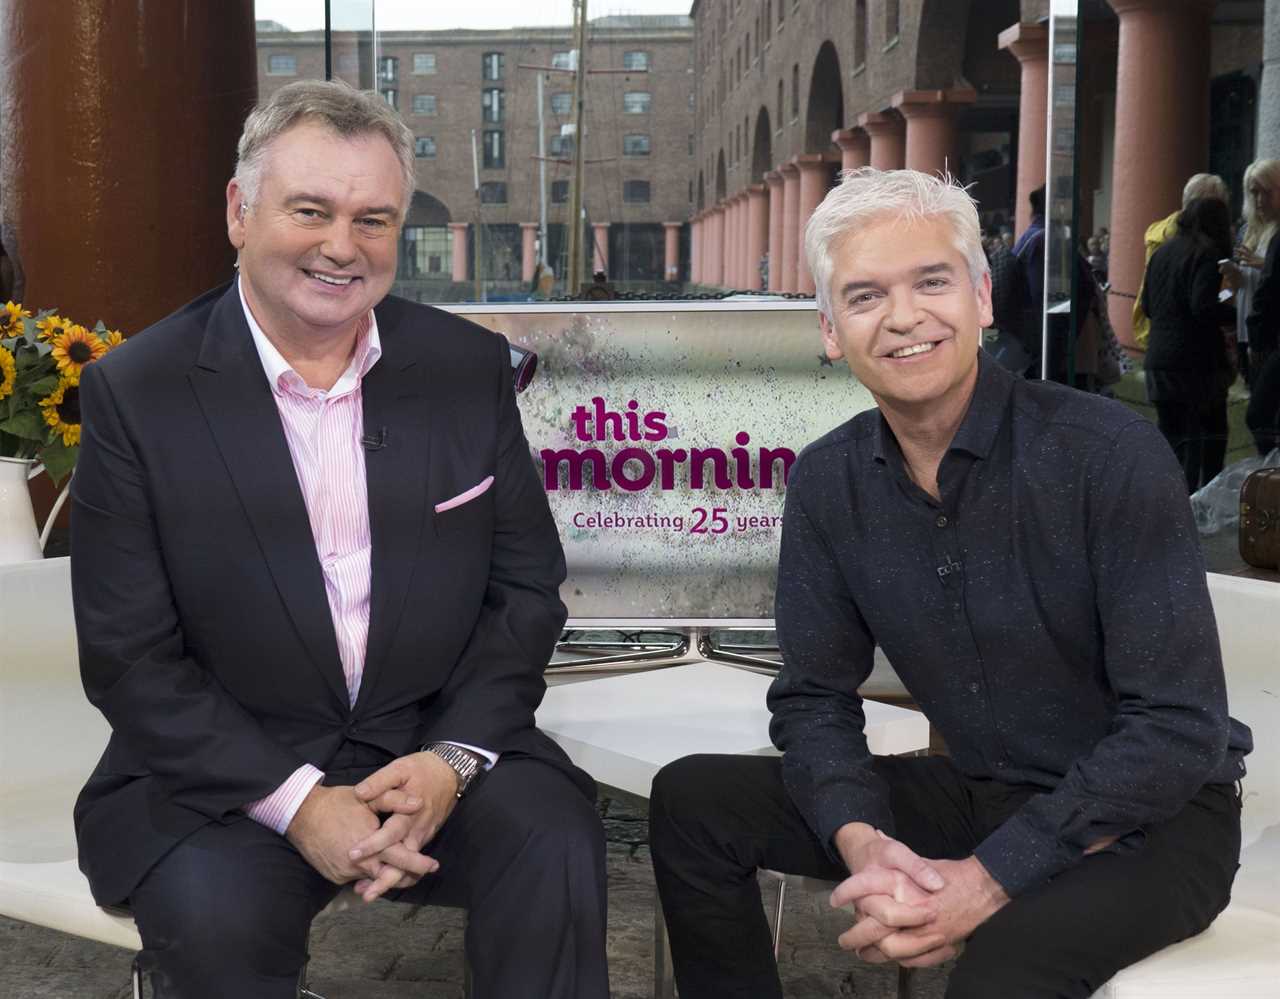 Eamonn Holmes hits back at Phillip Schofield calling him ‘delusional’ and warning ‘You’ve picked on the wrong person’